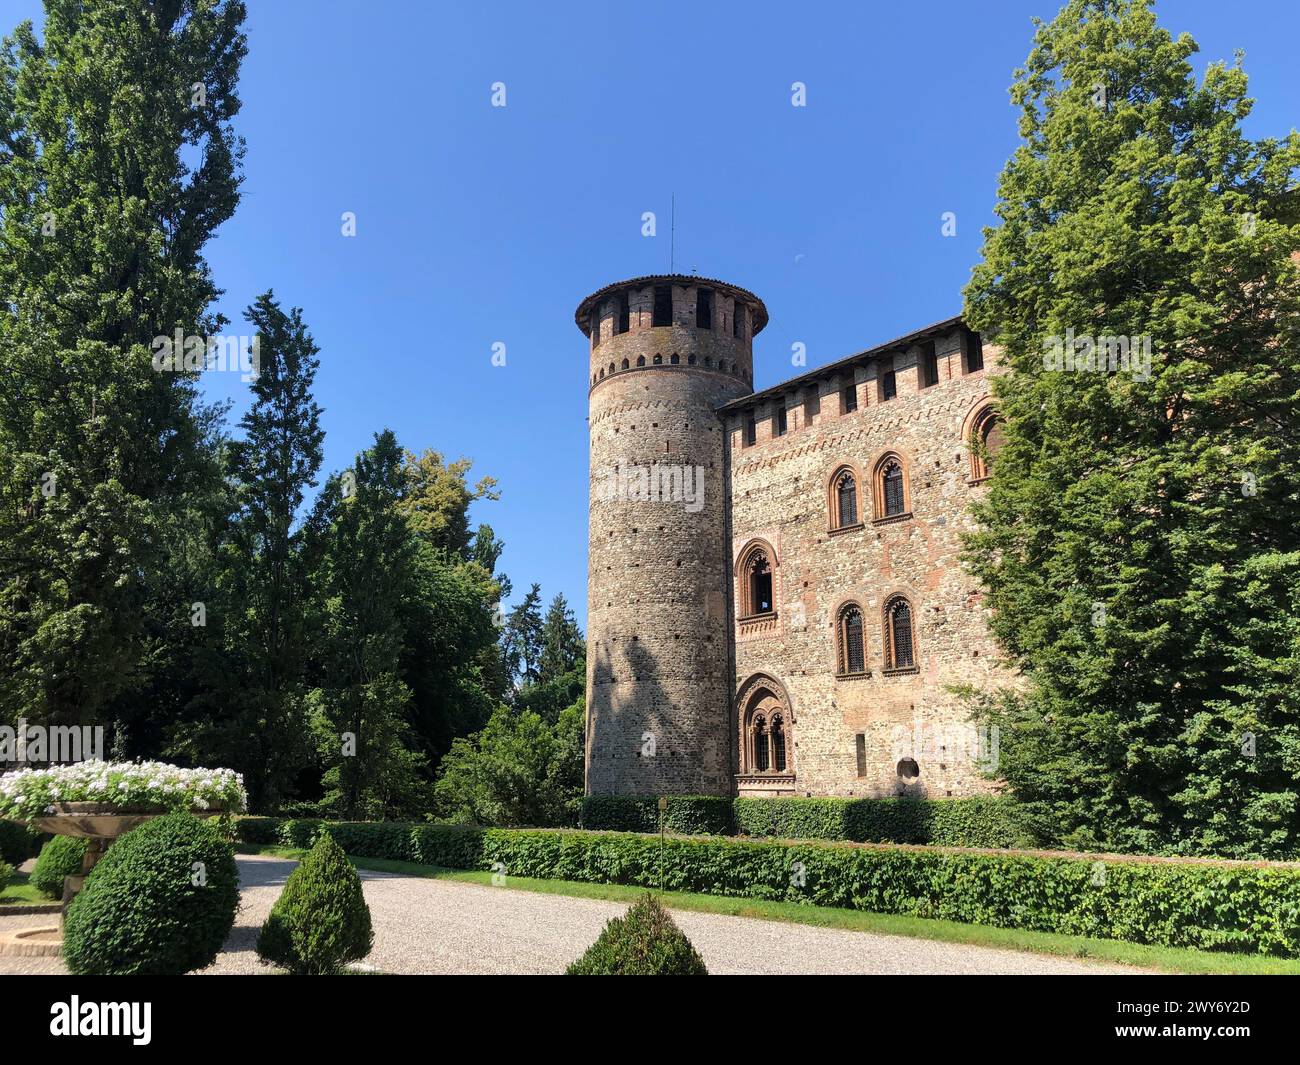 Grazzano Visconti, italy - june 11, 2023: view of medieval castle  in stone and bricks from the beautiful surrounding park in a day of summer Stock Photo